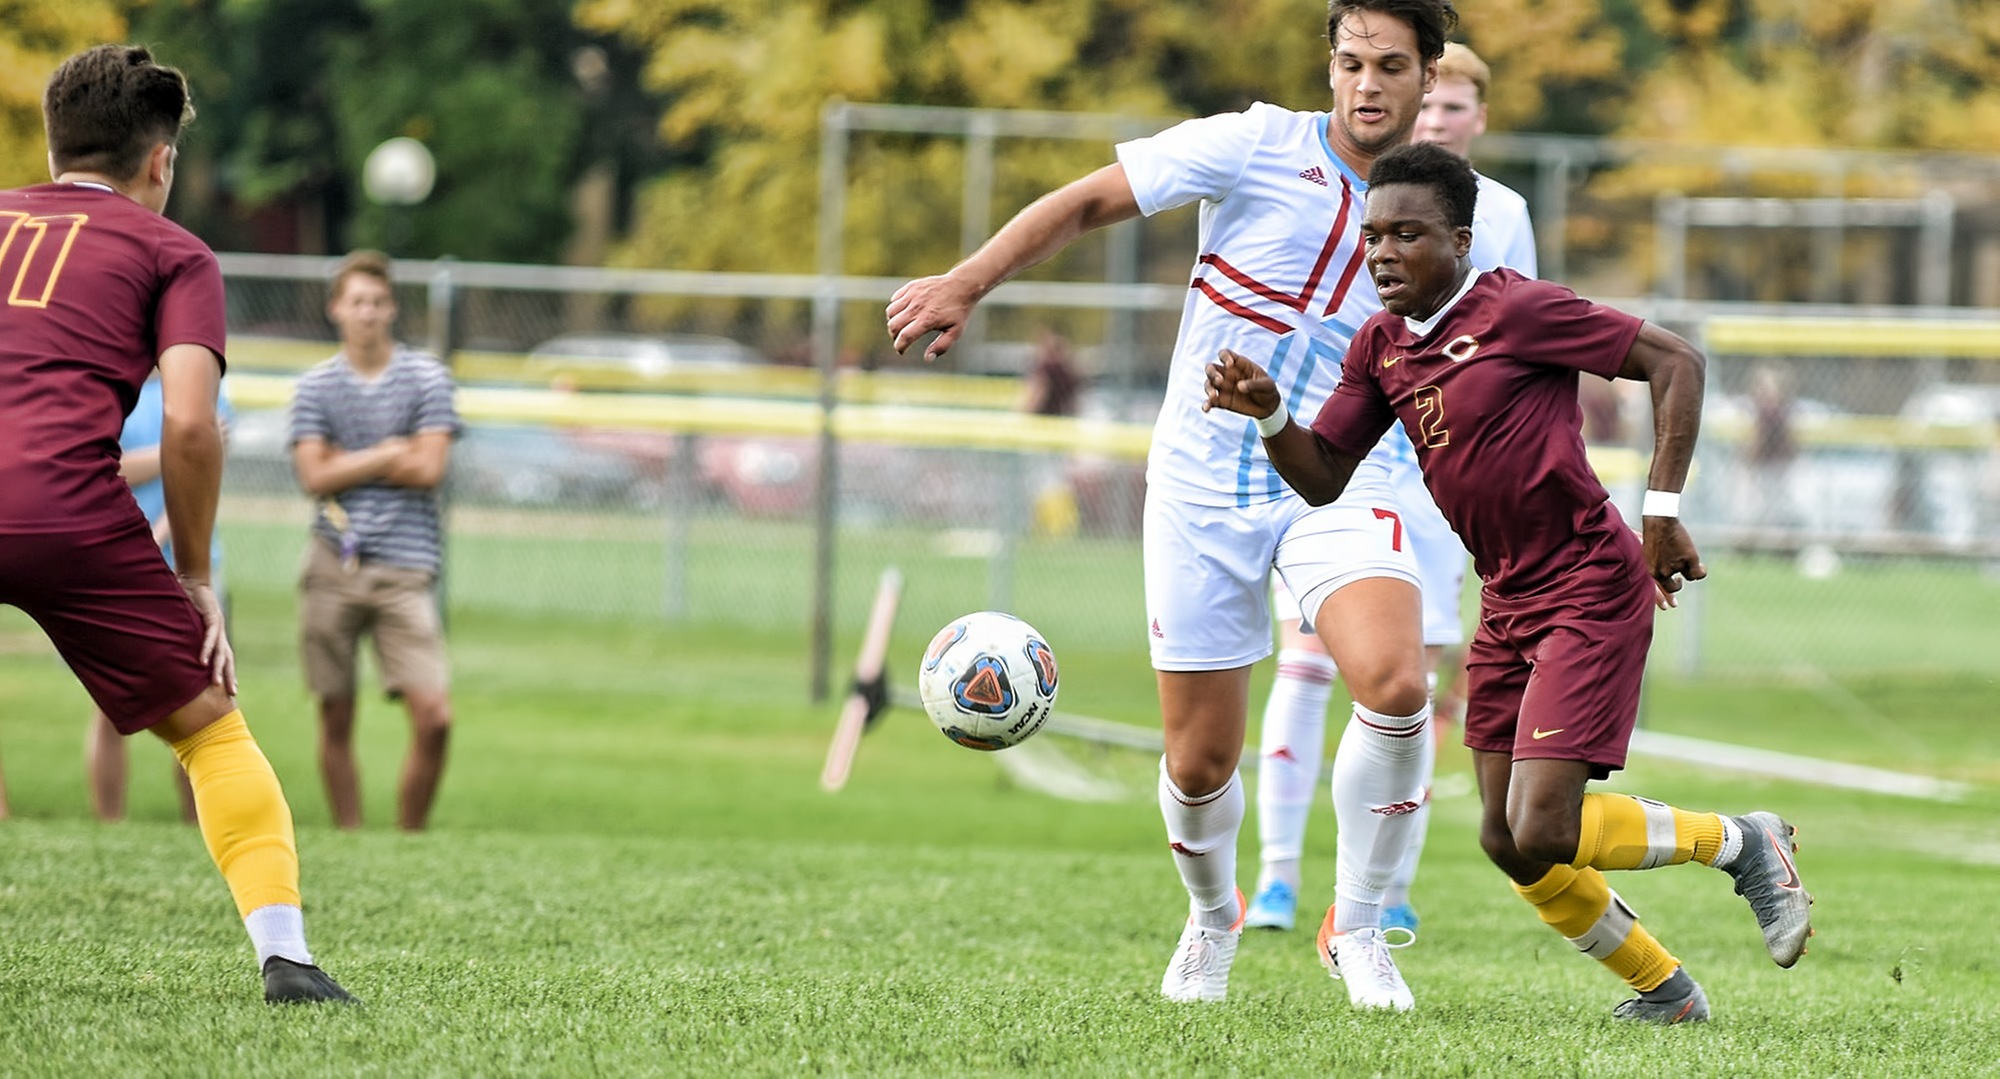 Freshman Patrick Smith led the Cobbers with two shots on goal against Carleton.